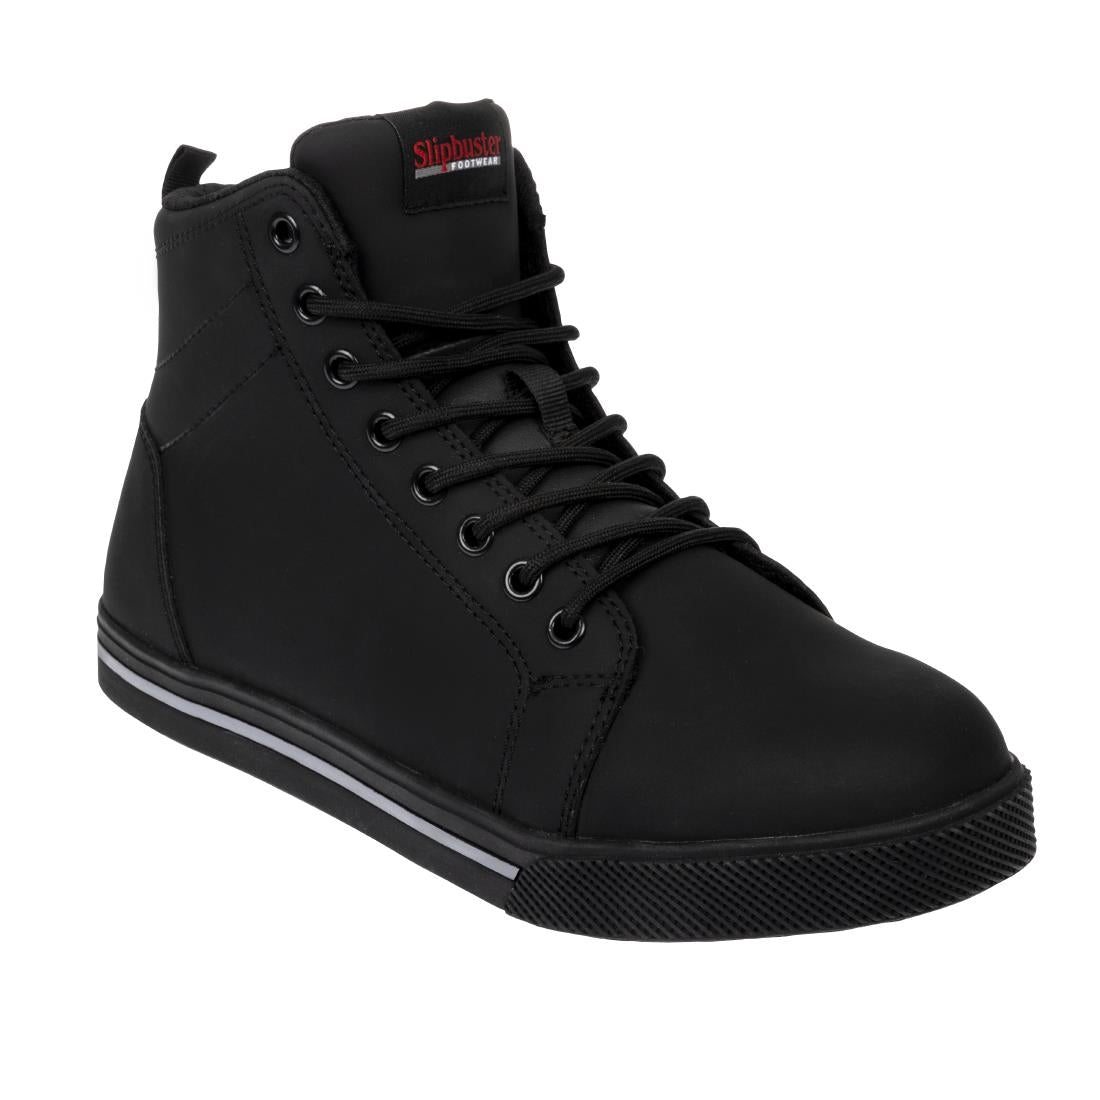 BA061-44 Slipbuster Recycled Microfibre Safety Hi Top Boots Matte Black 44 JD Catering Equipment Solutions Ltd